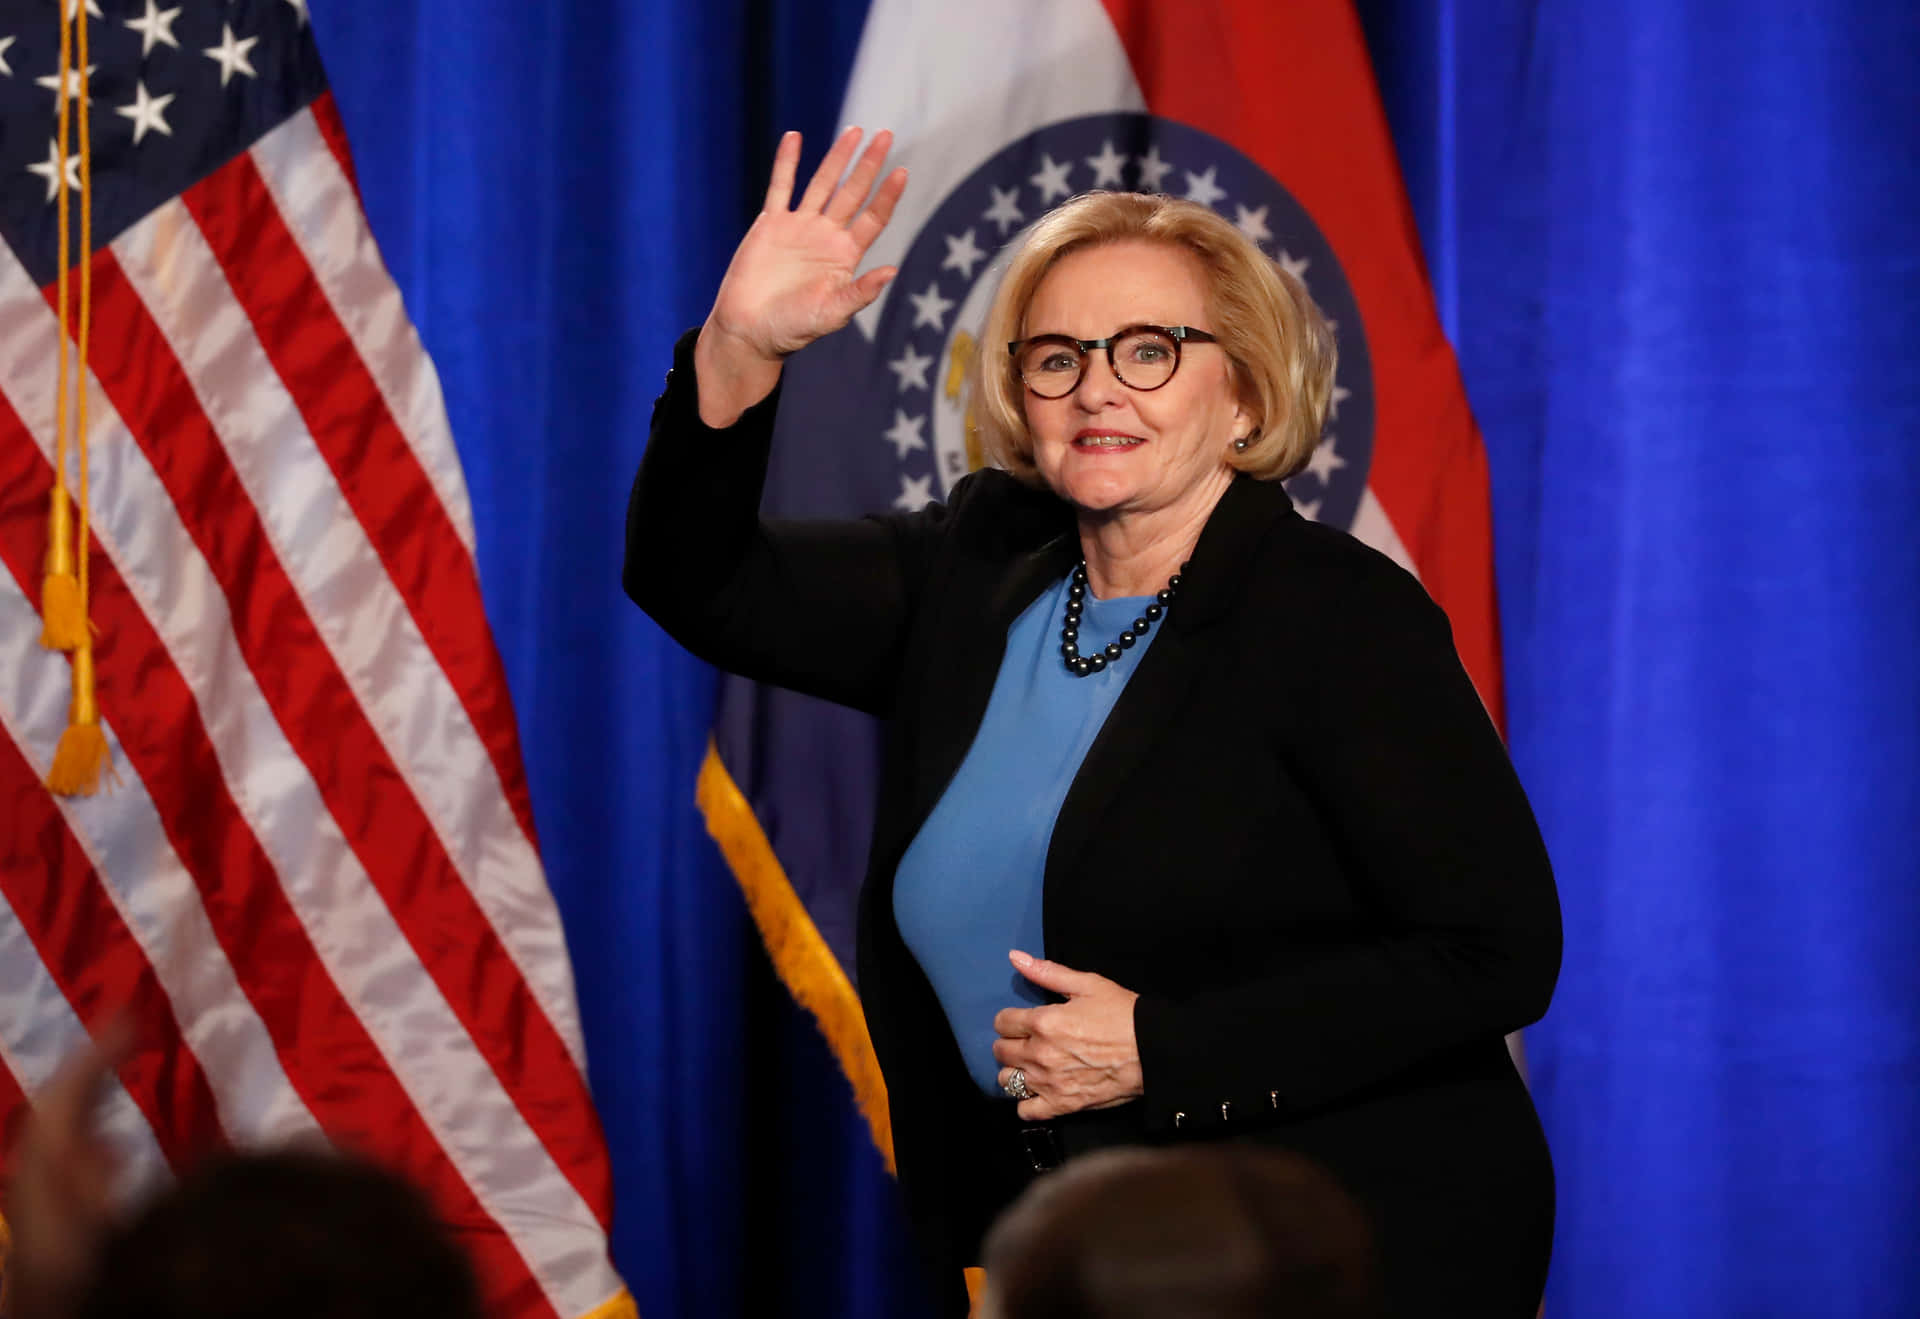 Claire Mccaskill Waving At Audience Wallpaper